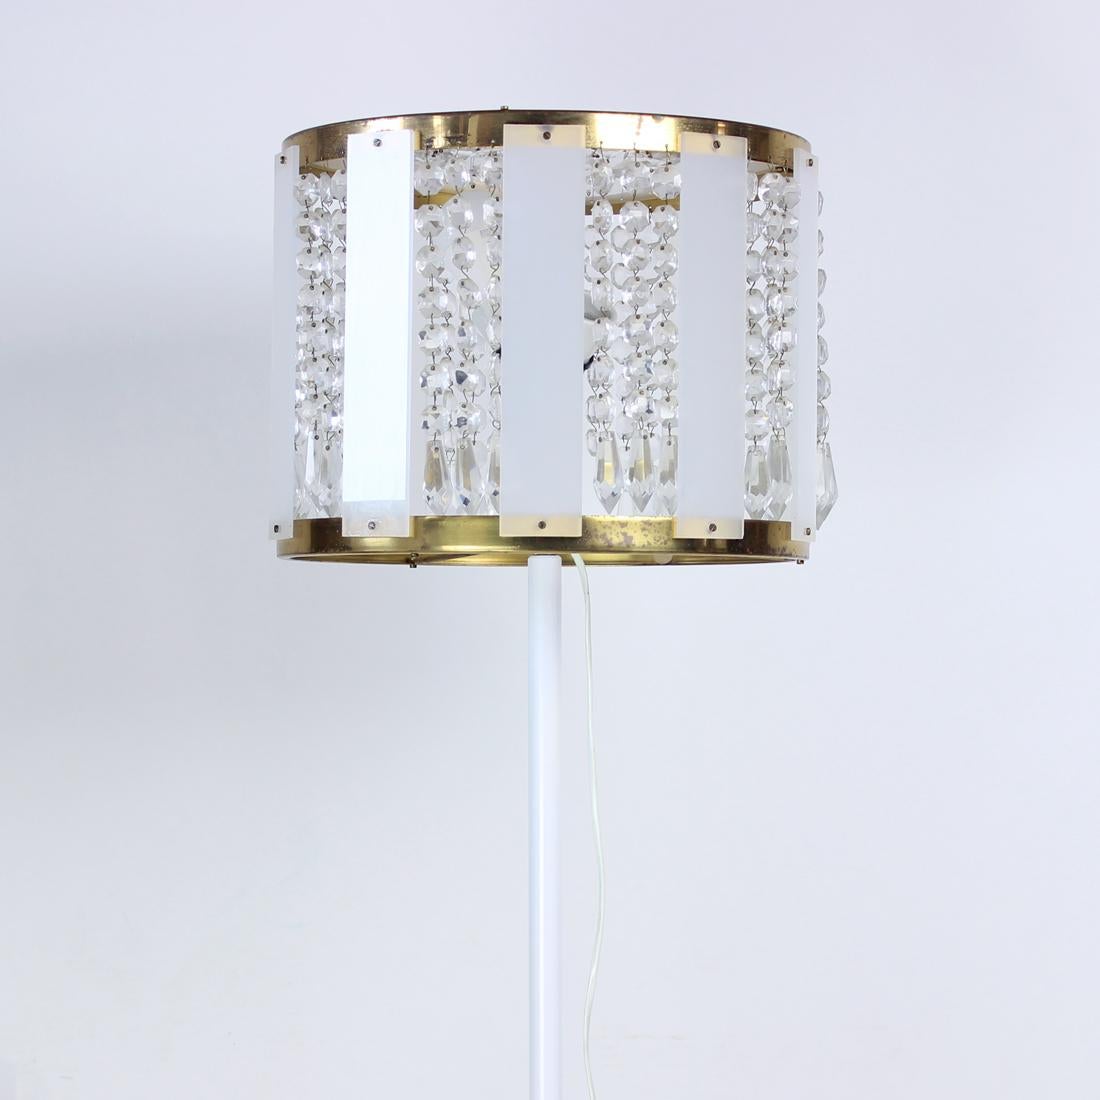 Beautiful, vintage freestanding lamp. Produced by Kamenicky Senov company in 1970s. The company specialized on the cut glass pieces, combining them with newer materials. This lamps is a perfect example of such a combination. Standing on the white